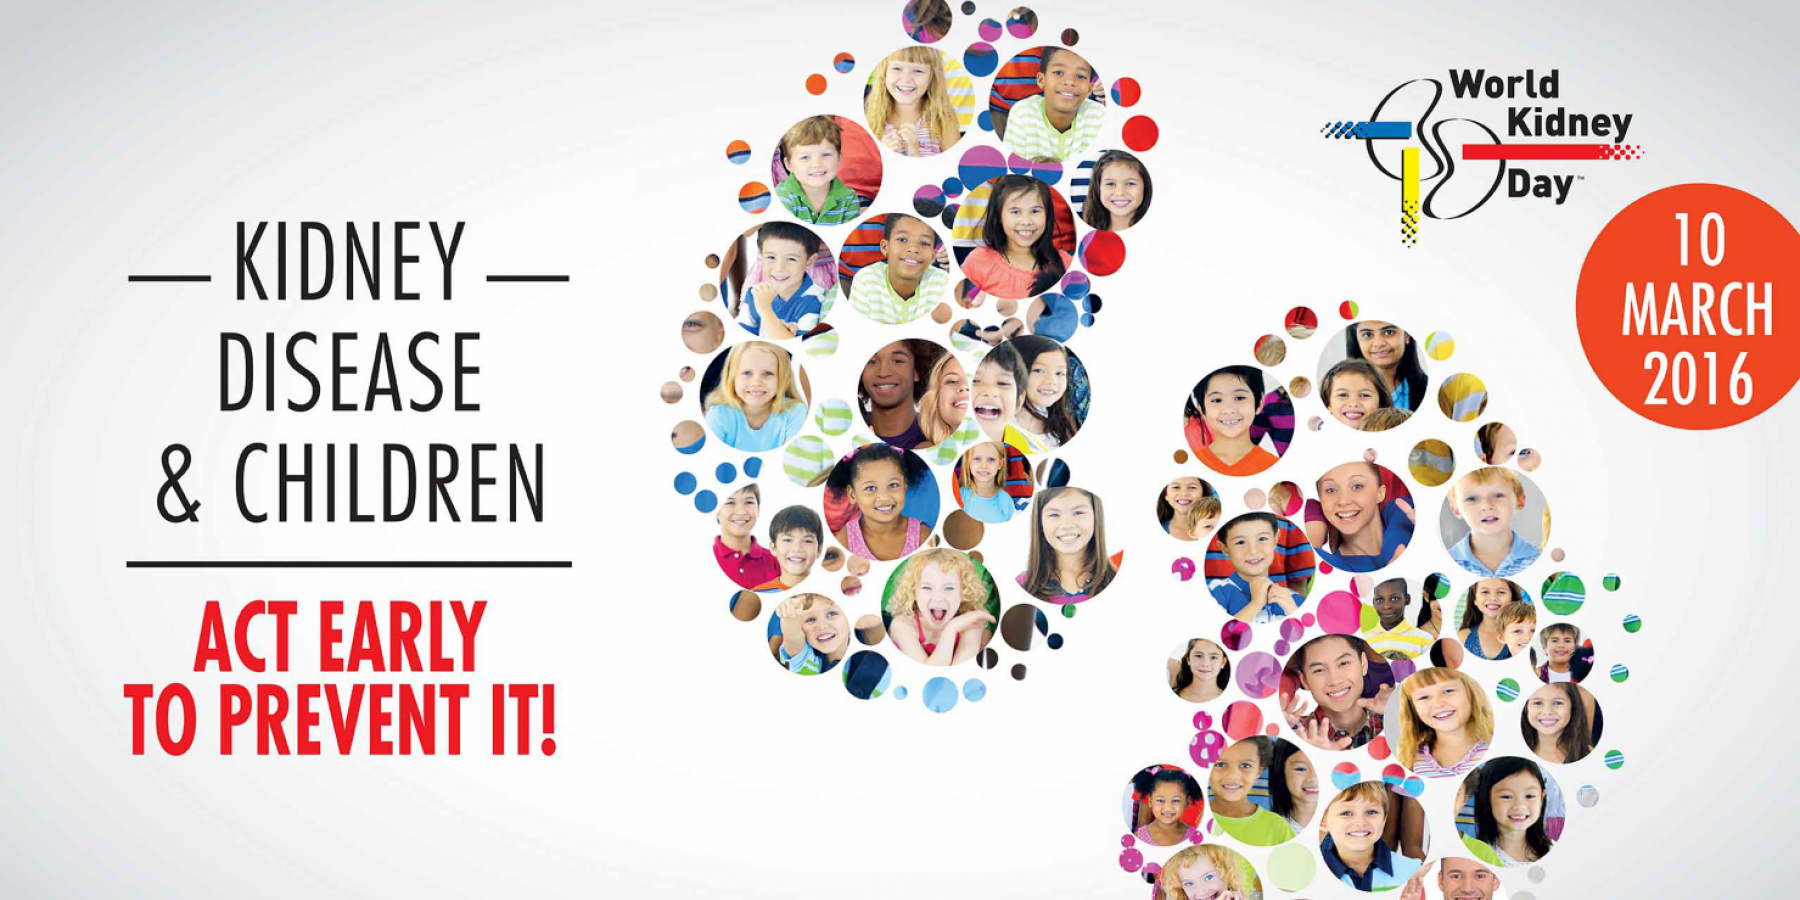 kidney disease & children act early to prevent it world kidney day